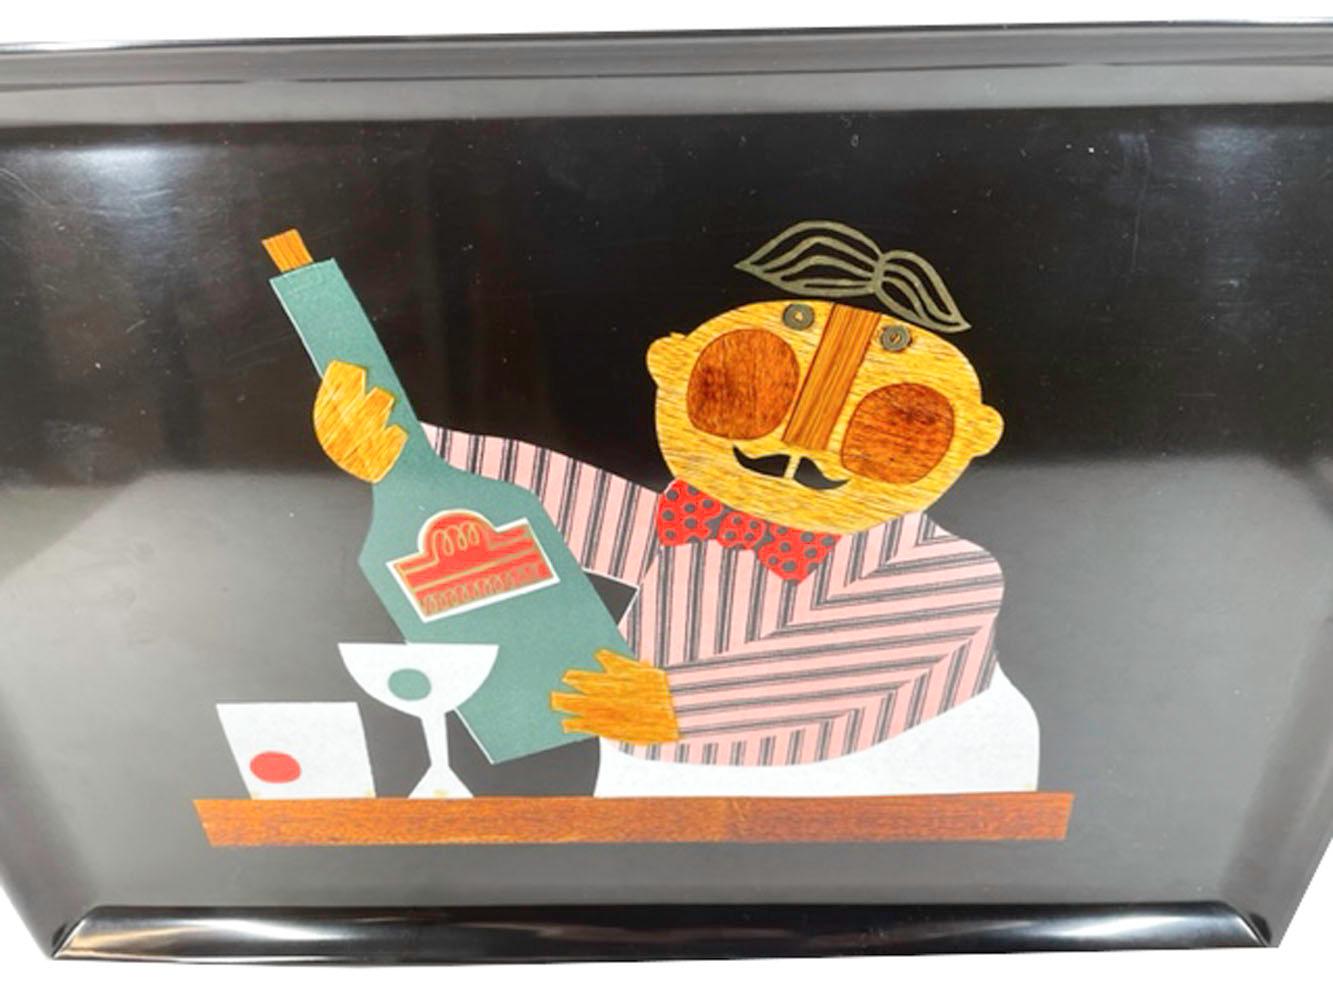 Mid-Century Modern phenolic resin serving tray by Couroc of Monterey with wood, colored resin and brass inlaid bartender with a striped shirt, holding a bottle and with two cocktails on the bar.